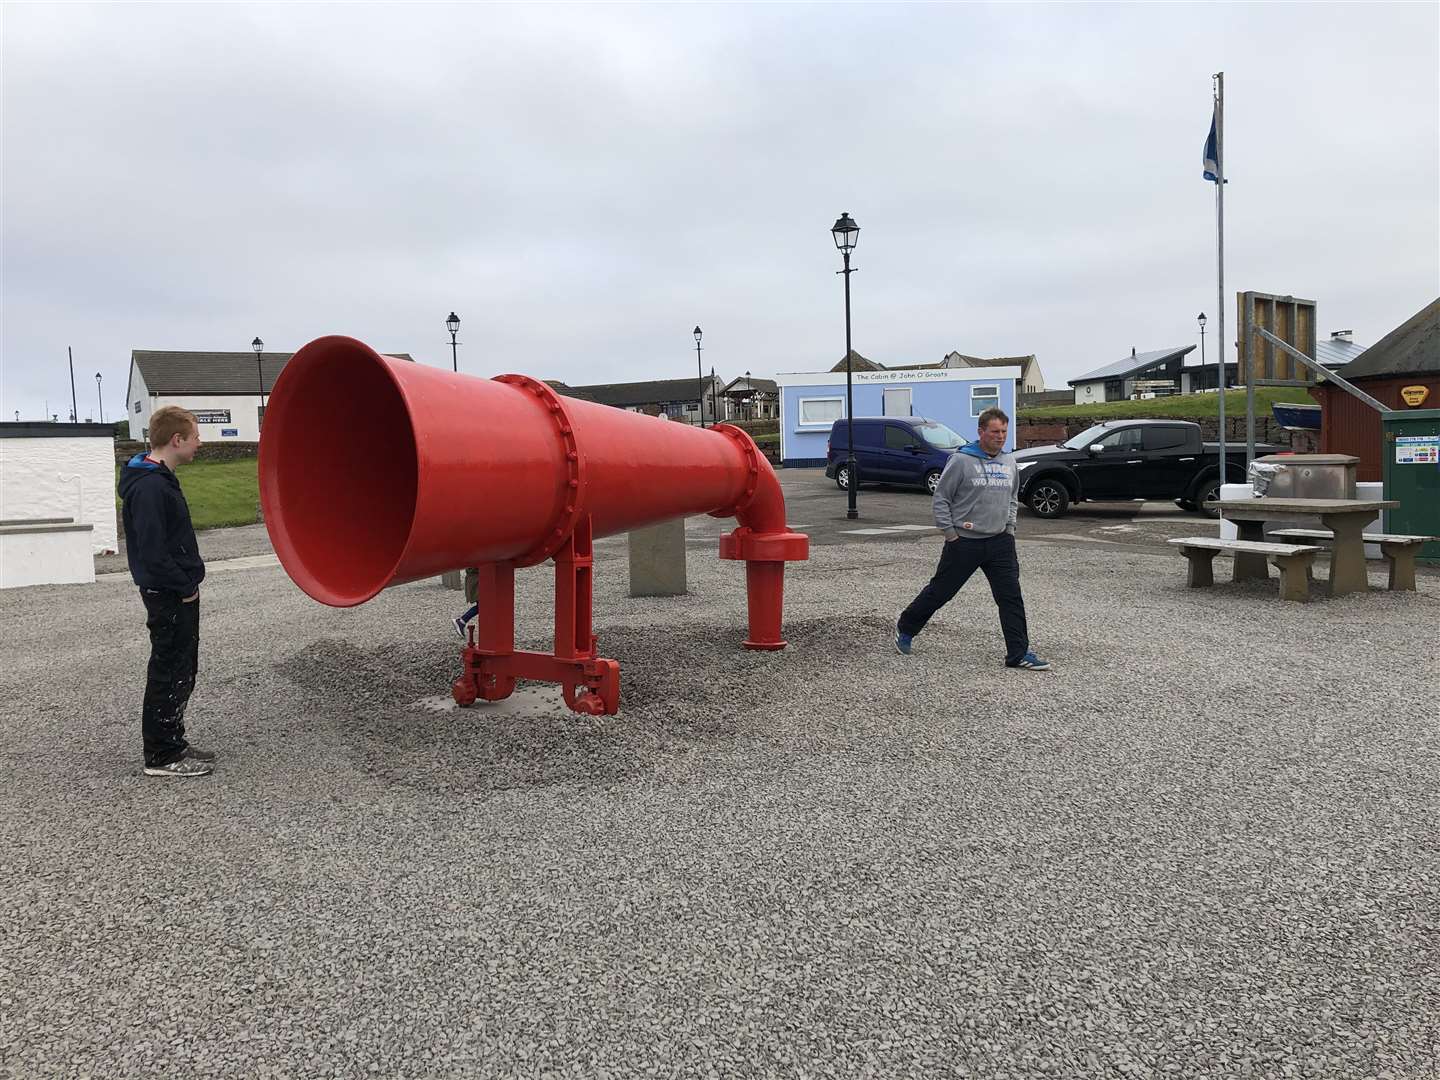 The old Duncansby Head foghorn is now in place as part of a range of improvements at John O'Groats, as Andrew Mowat explains in his interview for Wick Voices.